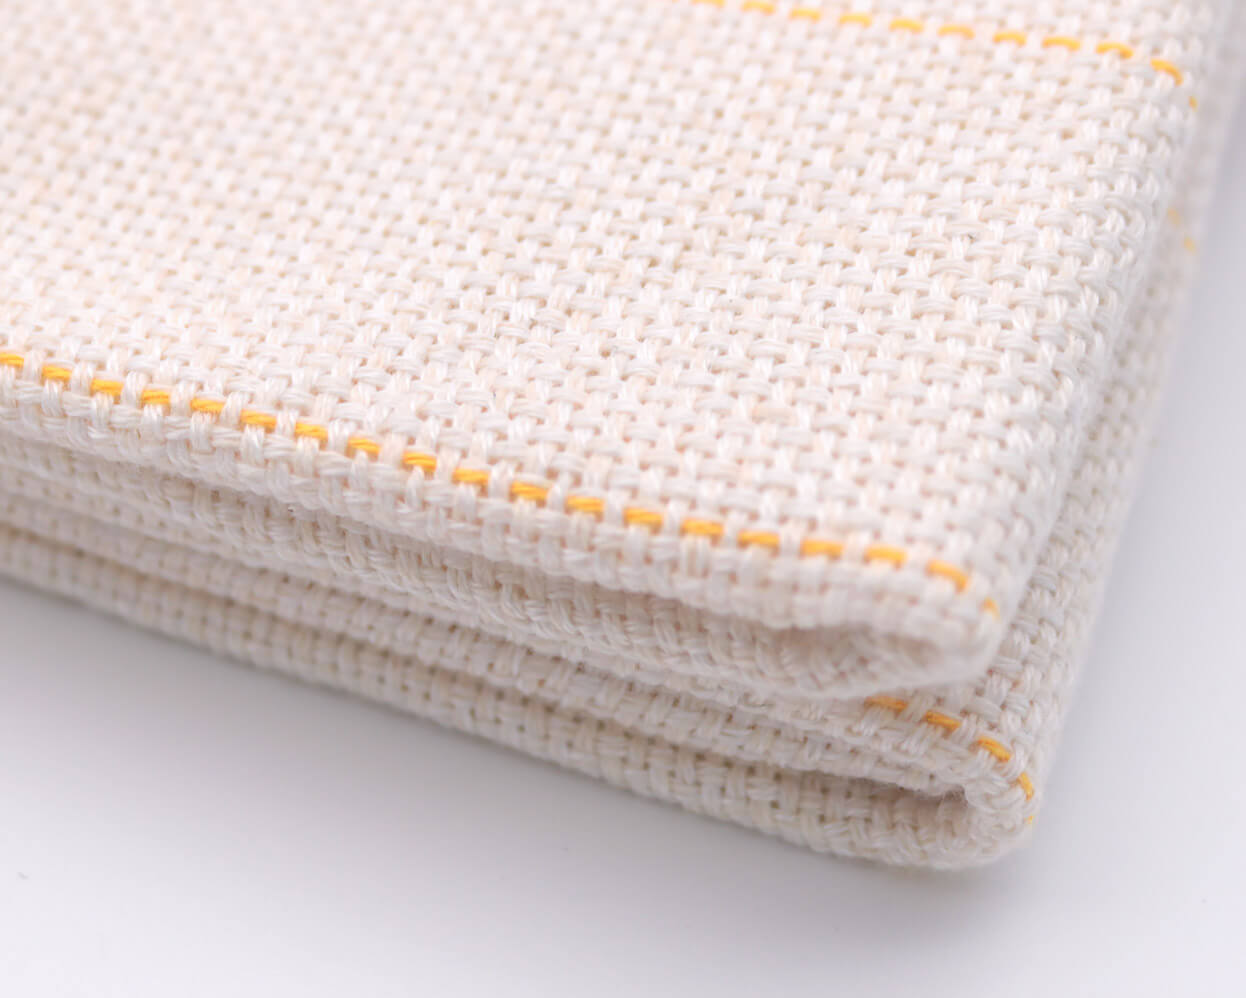 Primary Tufting Cloth - Ideal for Hand-Tufted Rugs and Hobbyist Rug Tufters  | TuftingPal